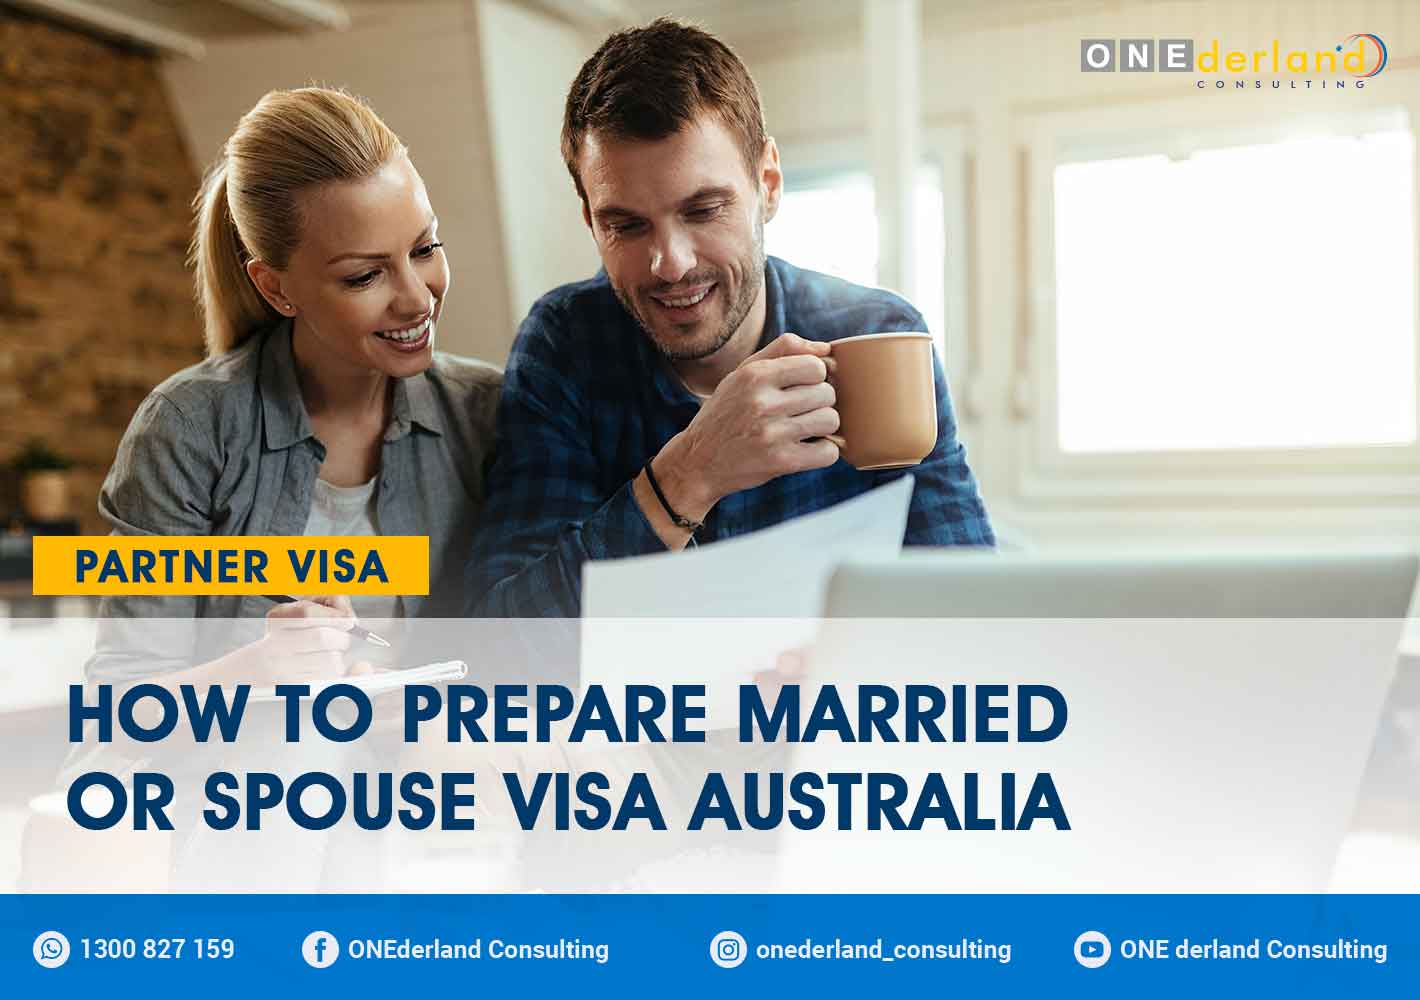 How to Prepare Married or Spouse Visa Australia